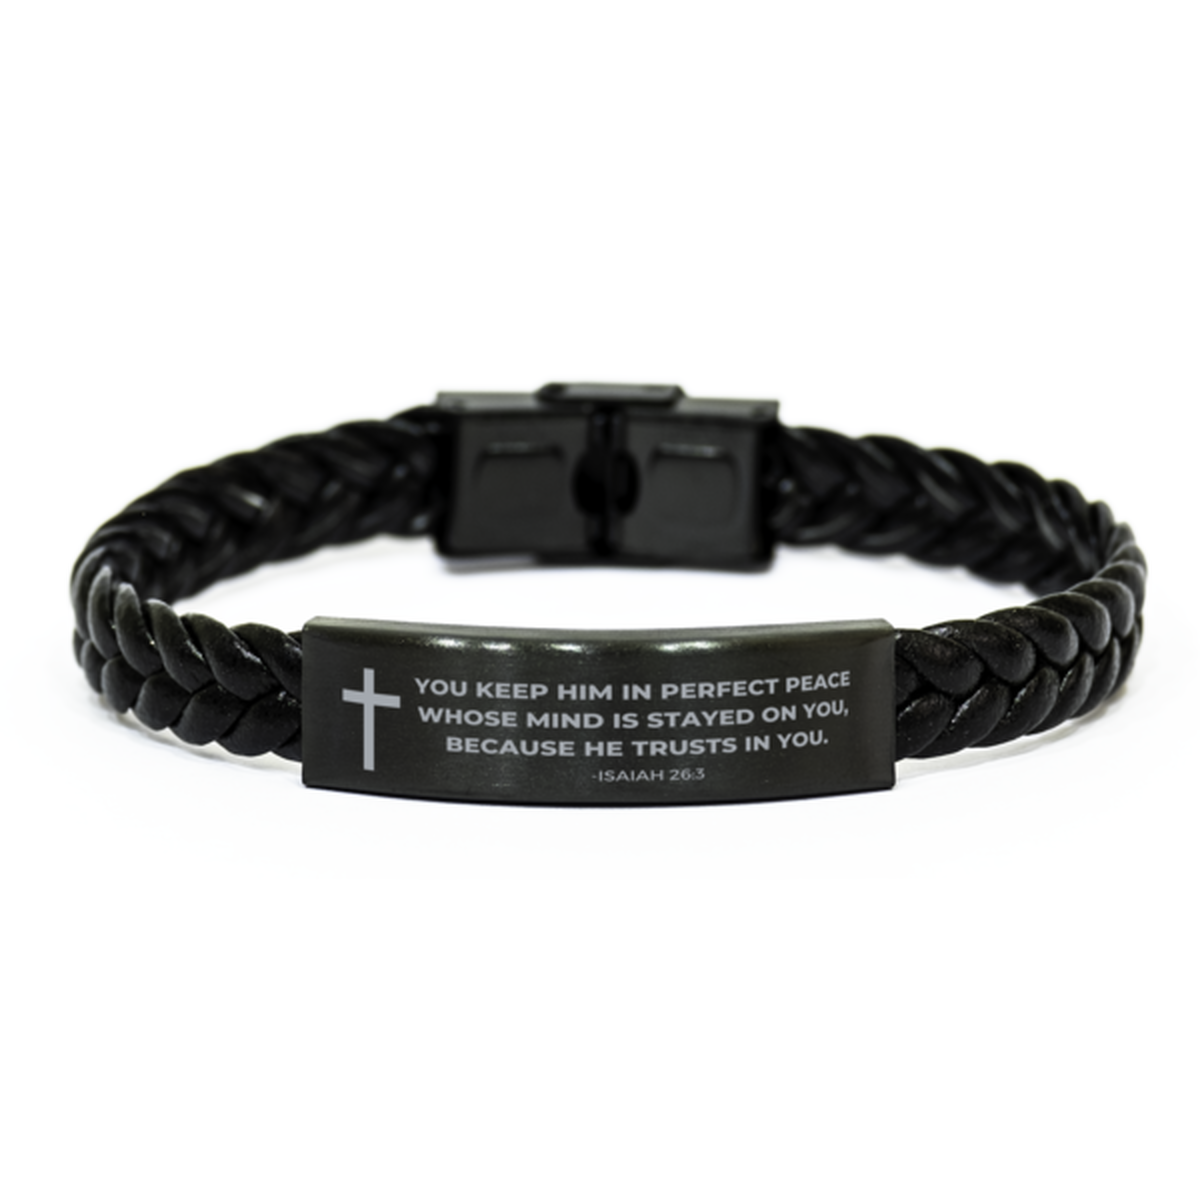 Baptism Gifts For Teenage Boys Girls, Christian Bible Verse Braided Leather Bracelet, You keep him in perfect peace, Catholic Confirmation Gifts for Son, Godson, Grandson, Nephew